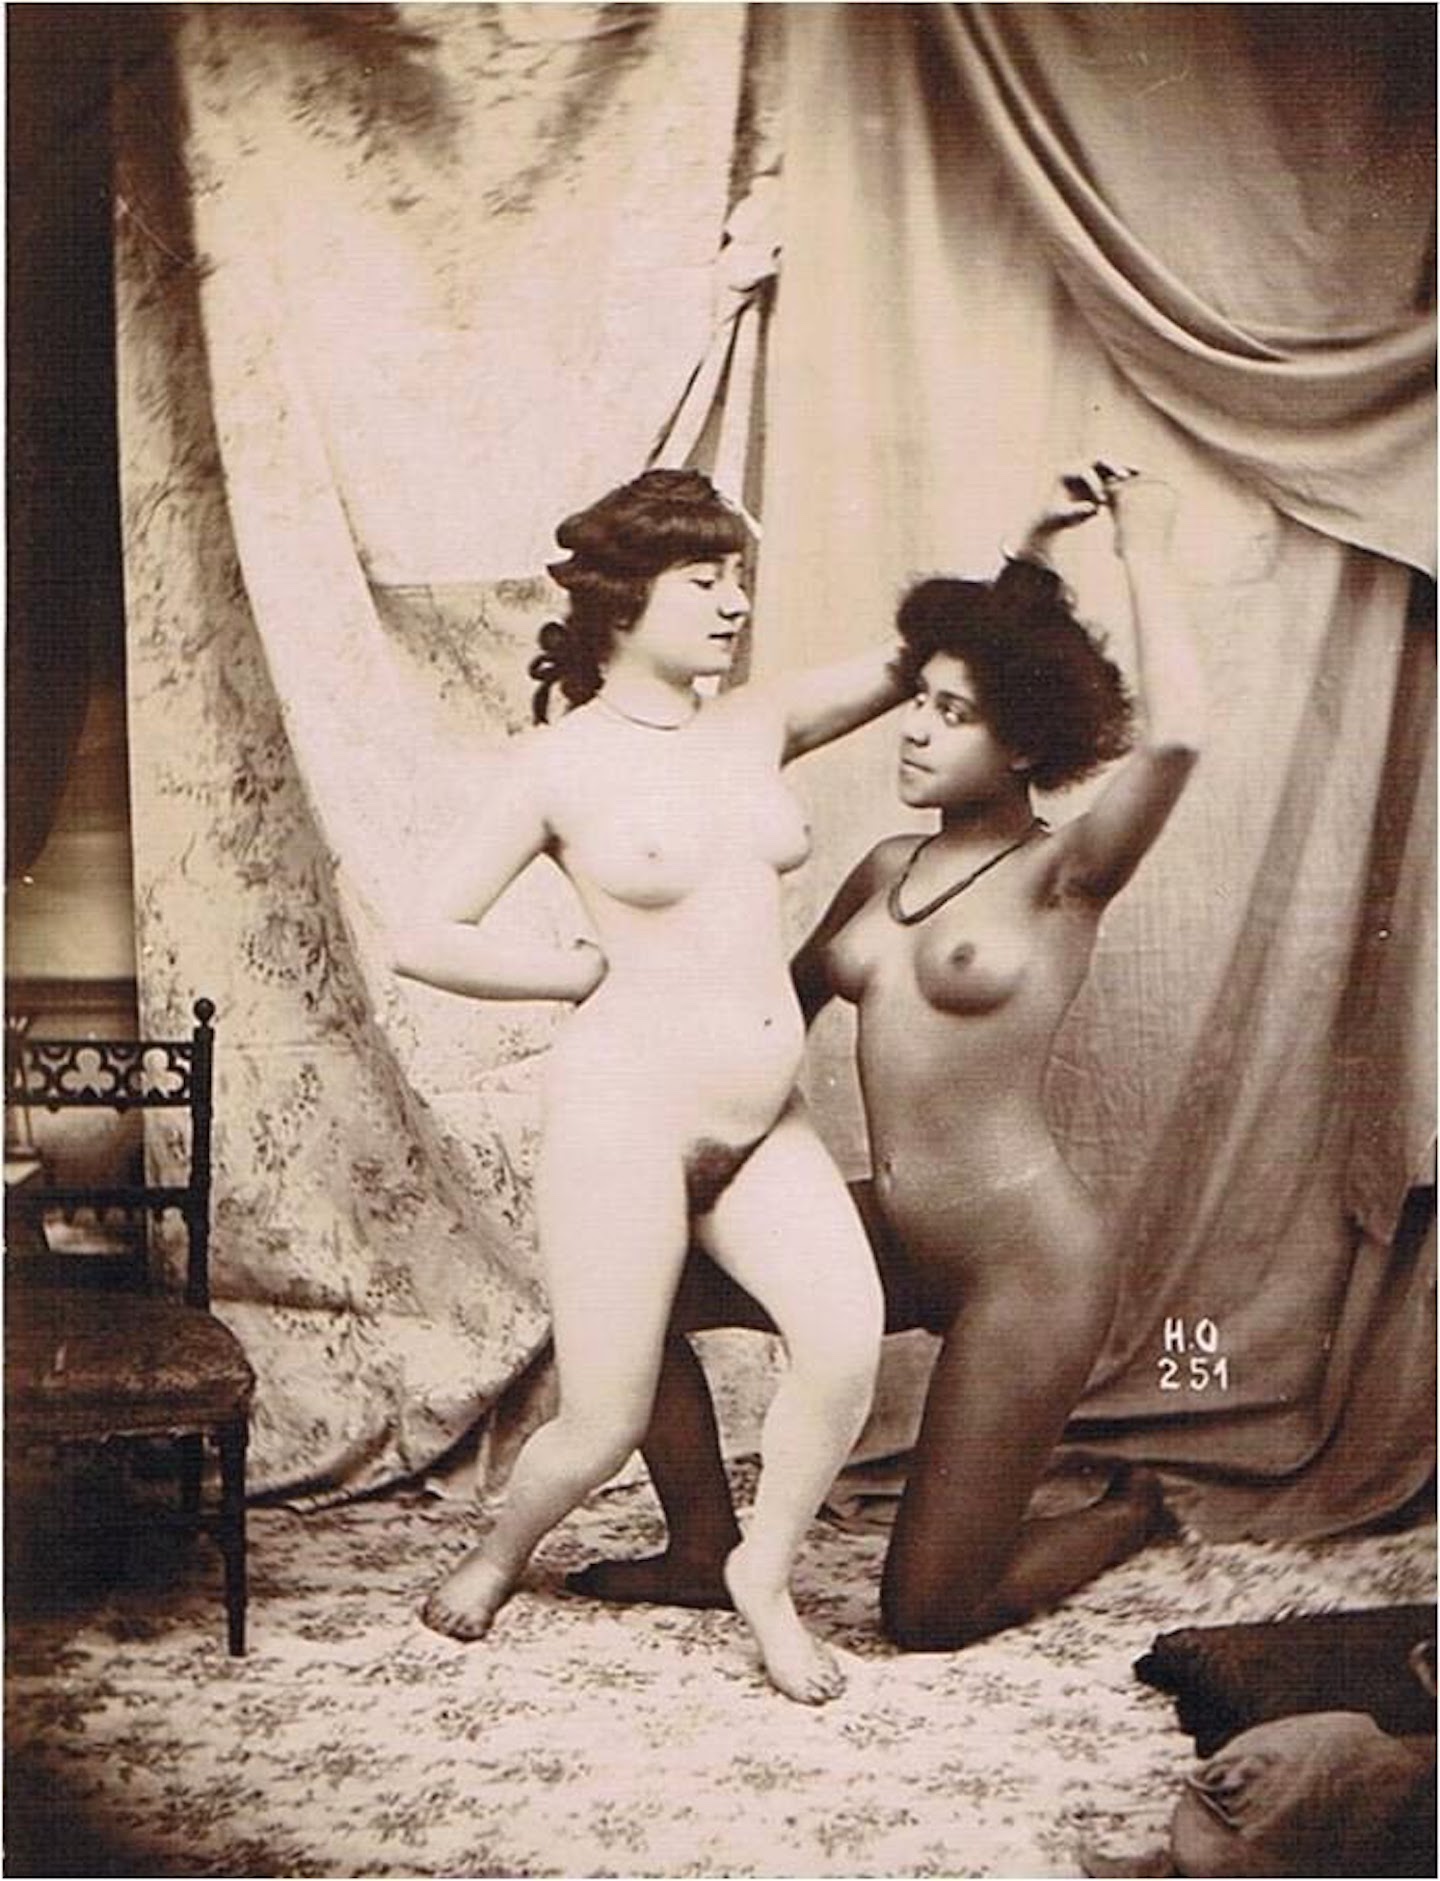 1800s Porno - Porn From The 1800s | Sex Pictures Pass